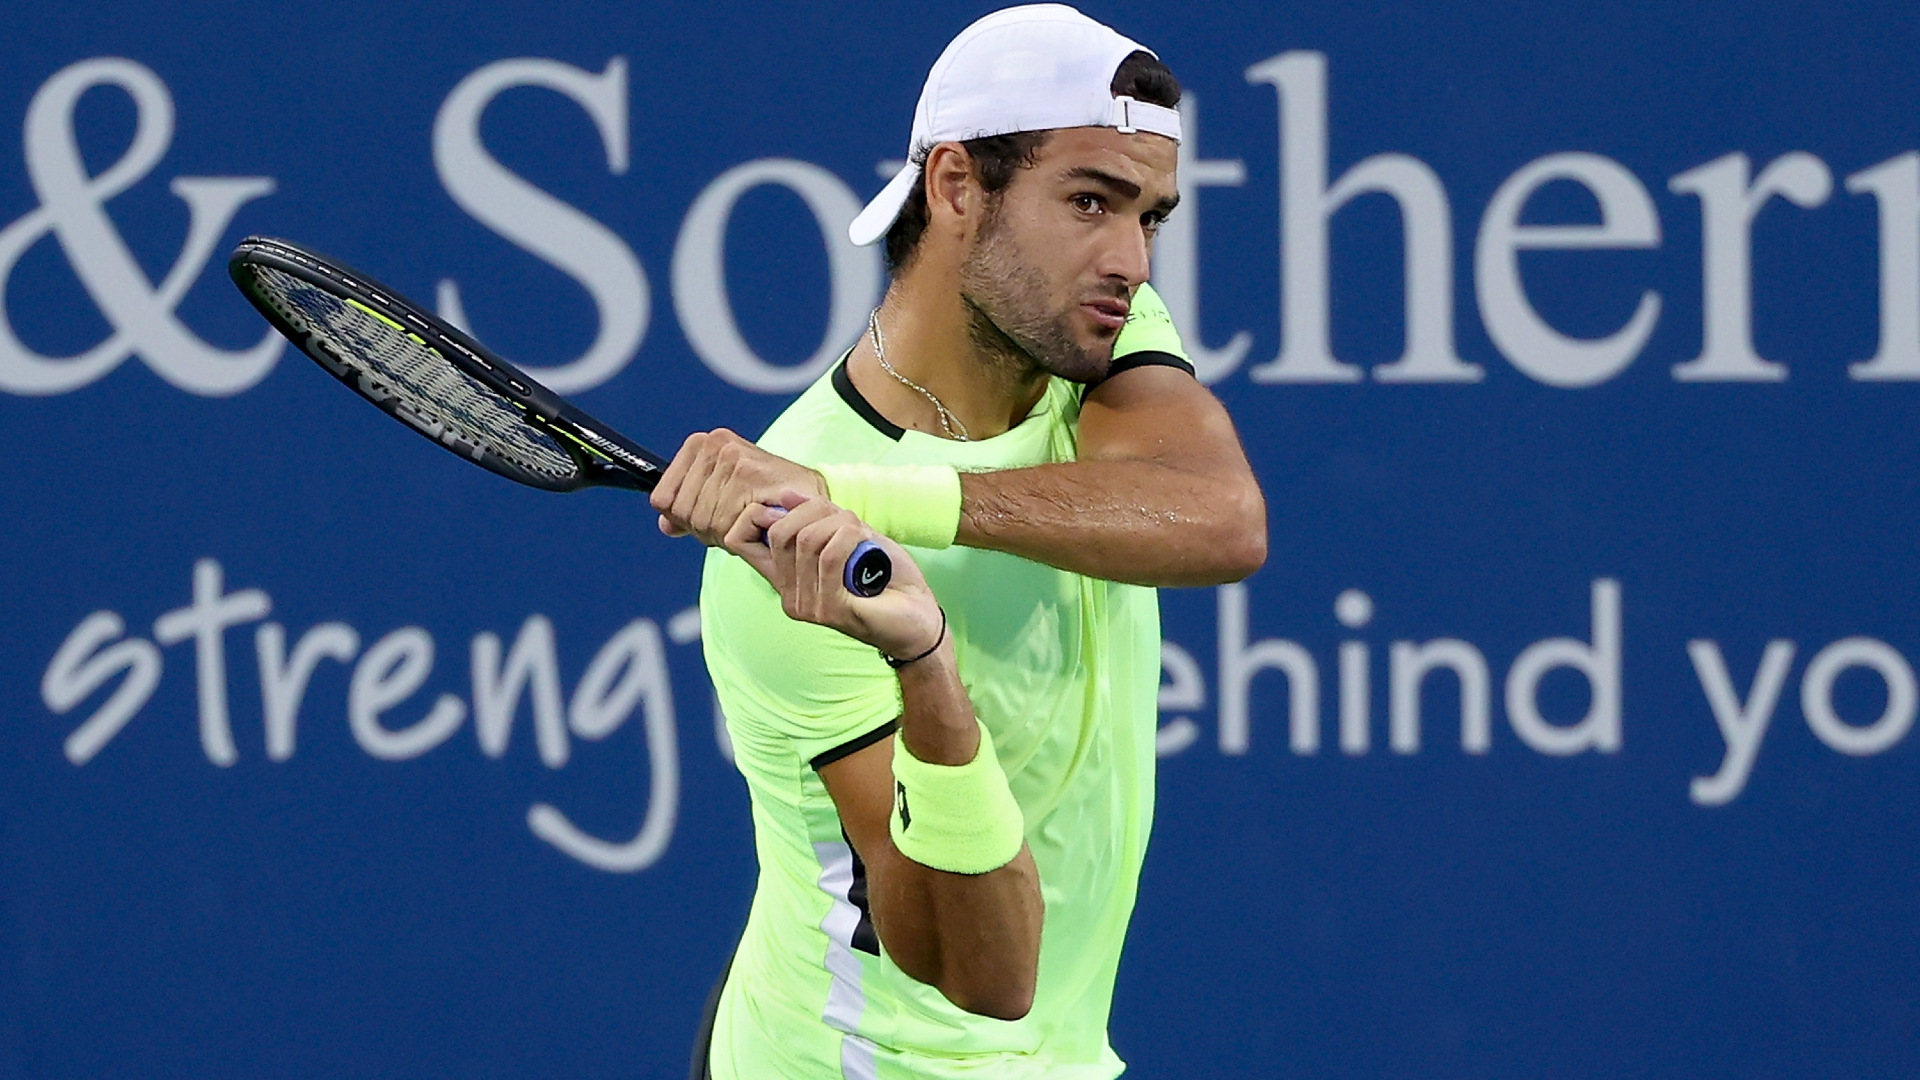 Matteo Berrettini won in his first match since losing the Wimbledon final to Novak Djokovic, although he had an early scare.